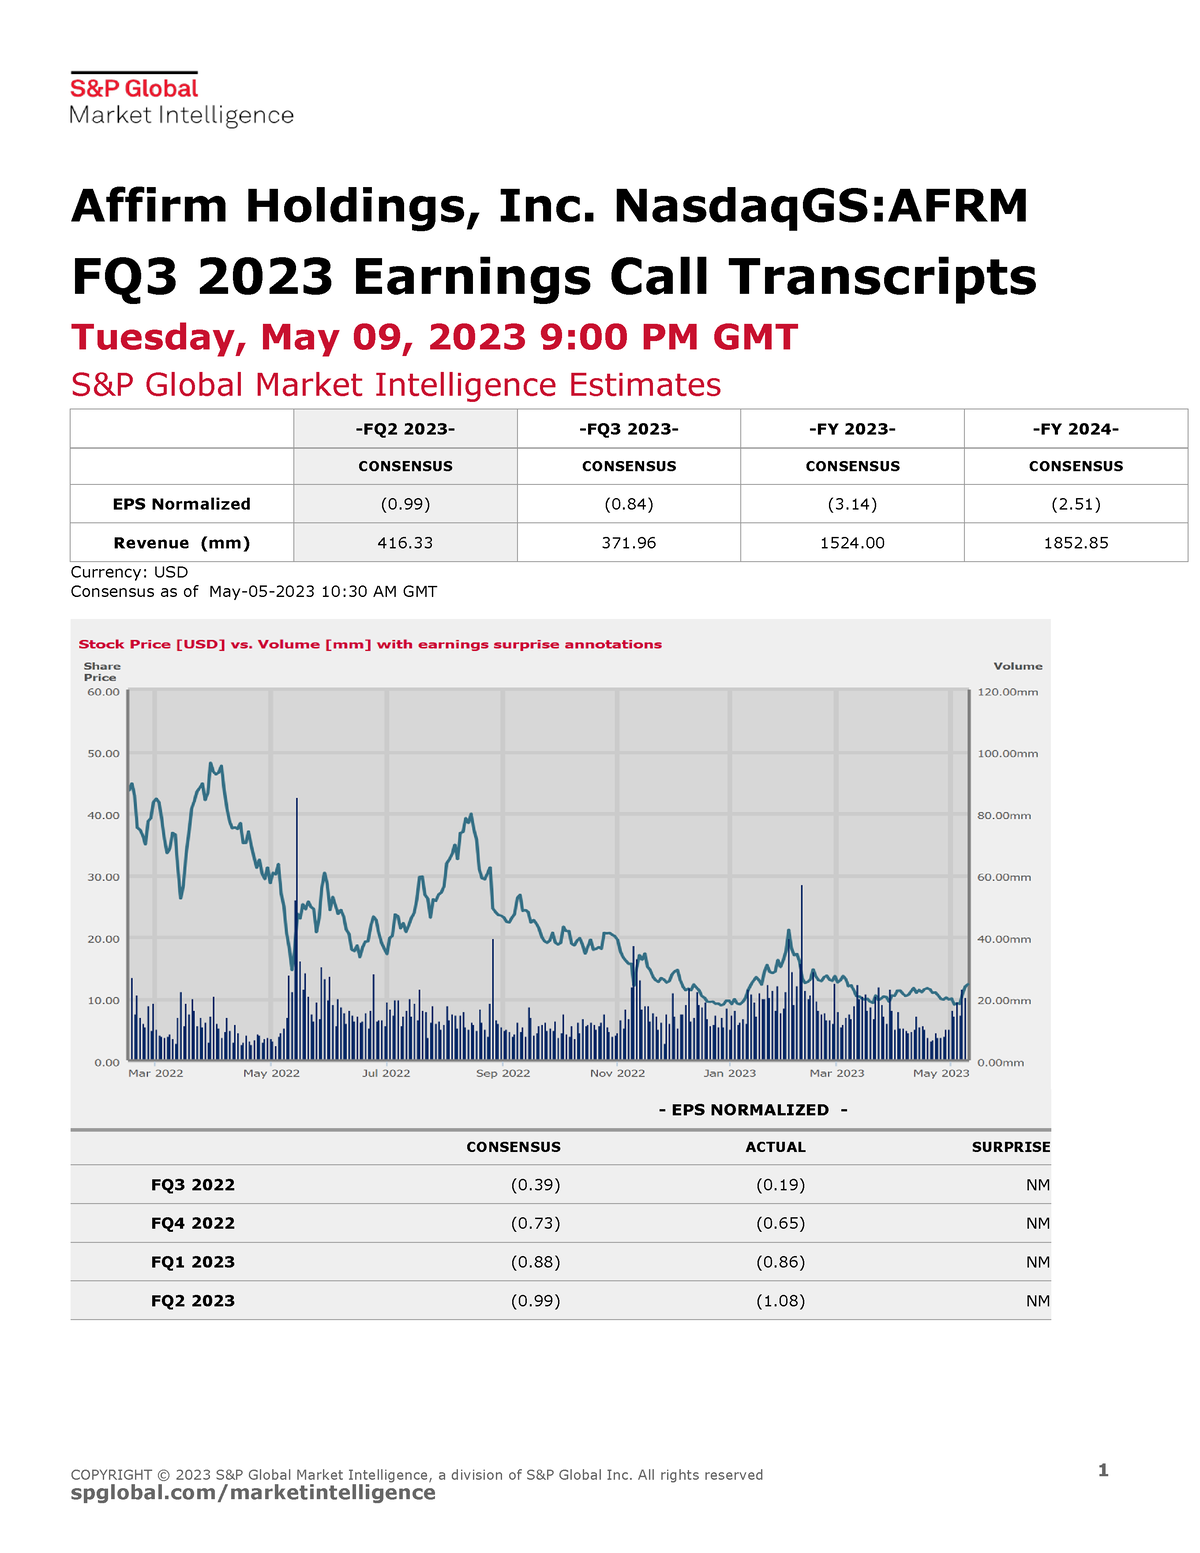 Affirm Holdings, Inc., Q3 2023 Earnings Call, May 09, 2023 COPYRIGHT © 2023 S&P Global Market